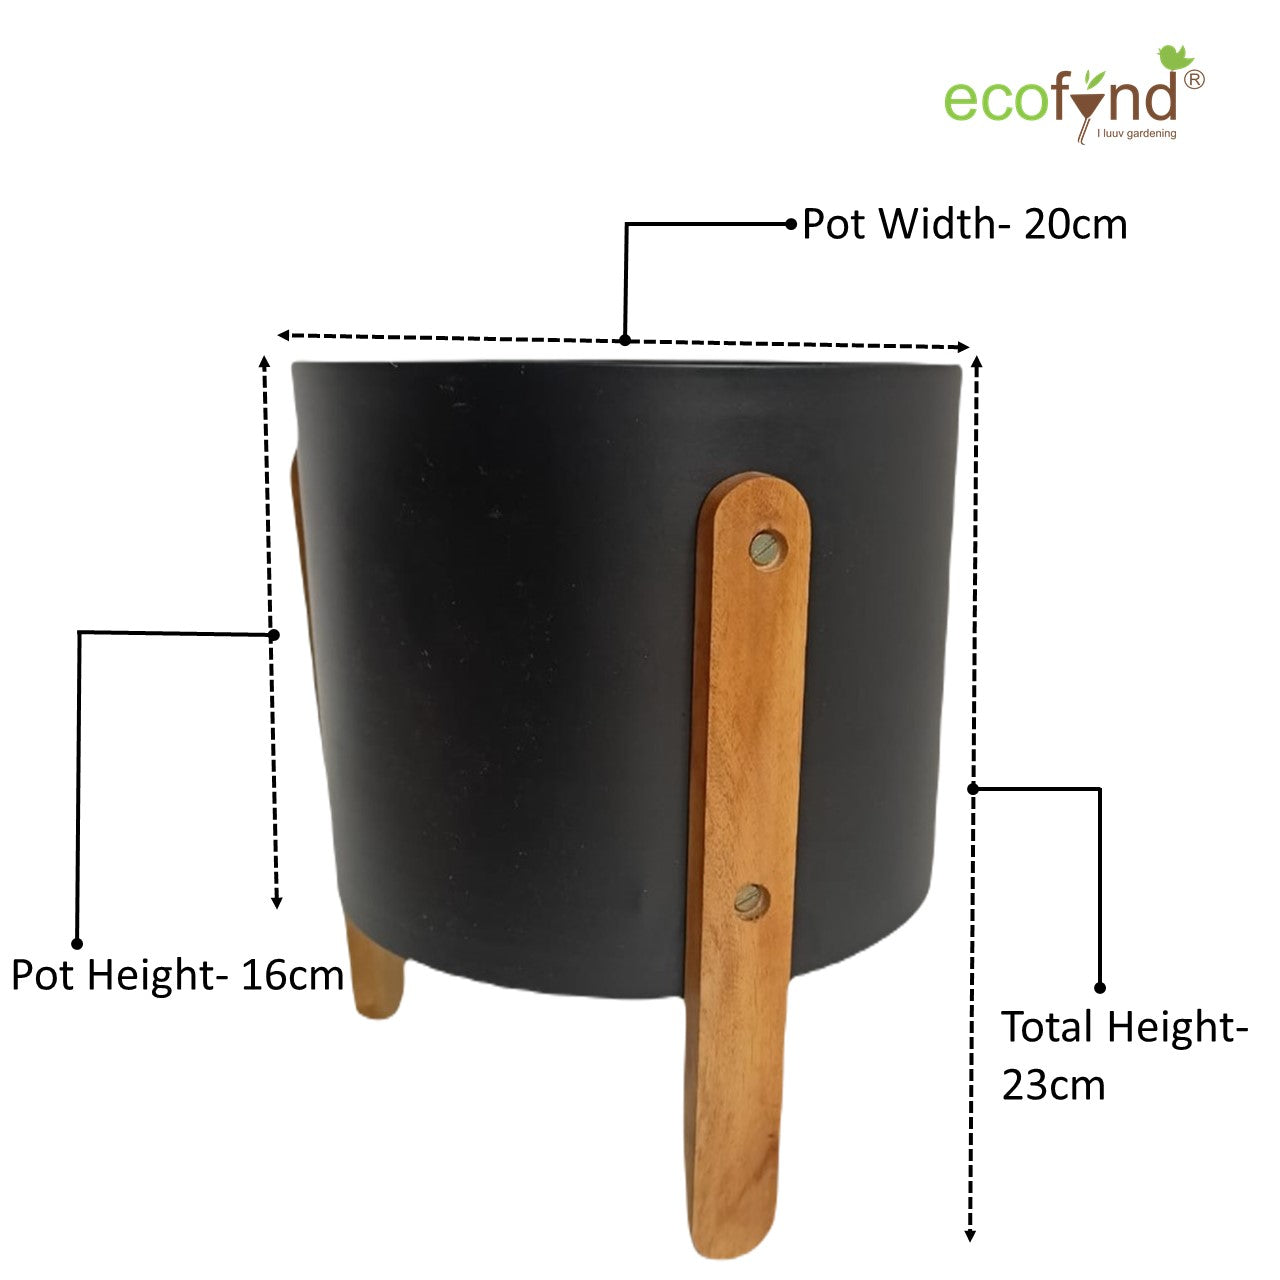 ecofynd 8 inches Edy Black Metal Planter Pot with Wooden Stand Planter freeshipping - Ecofynd